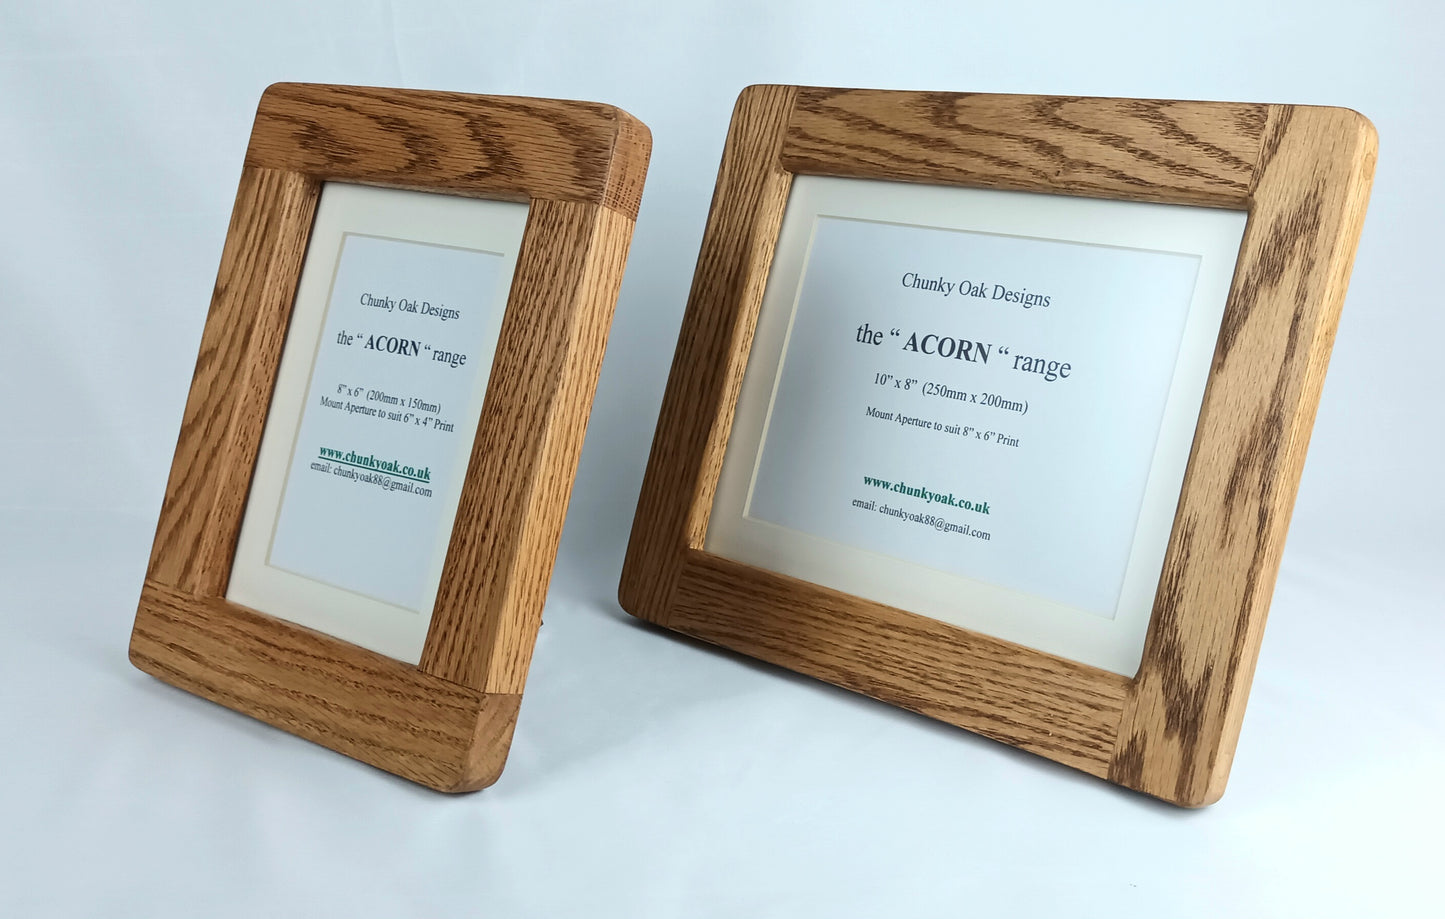 Solid Oak Picture Frames from the 'Acorn' range